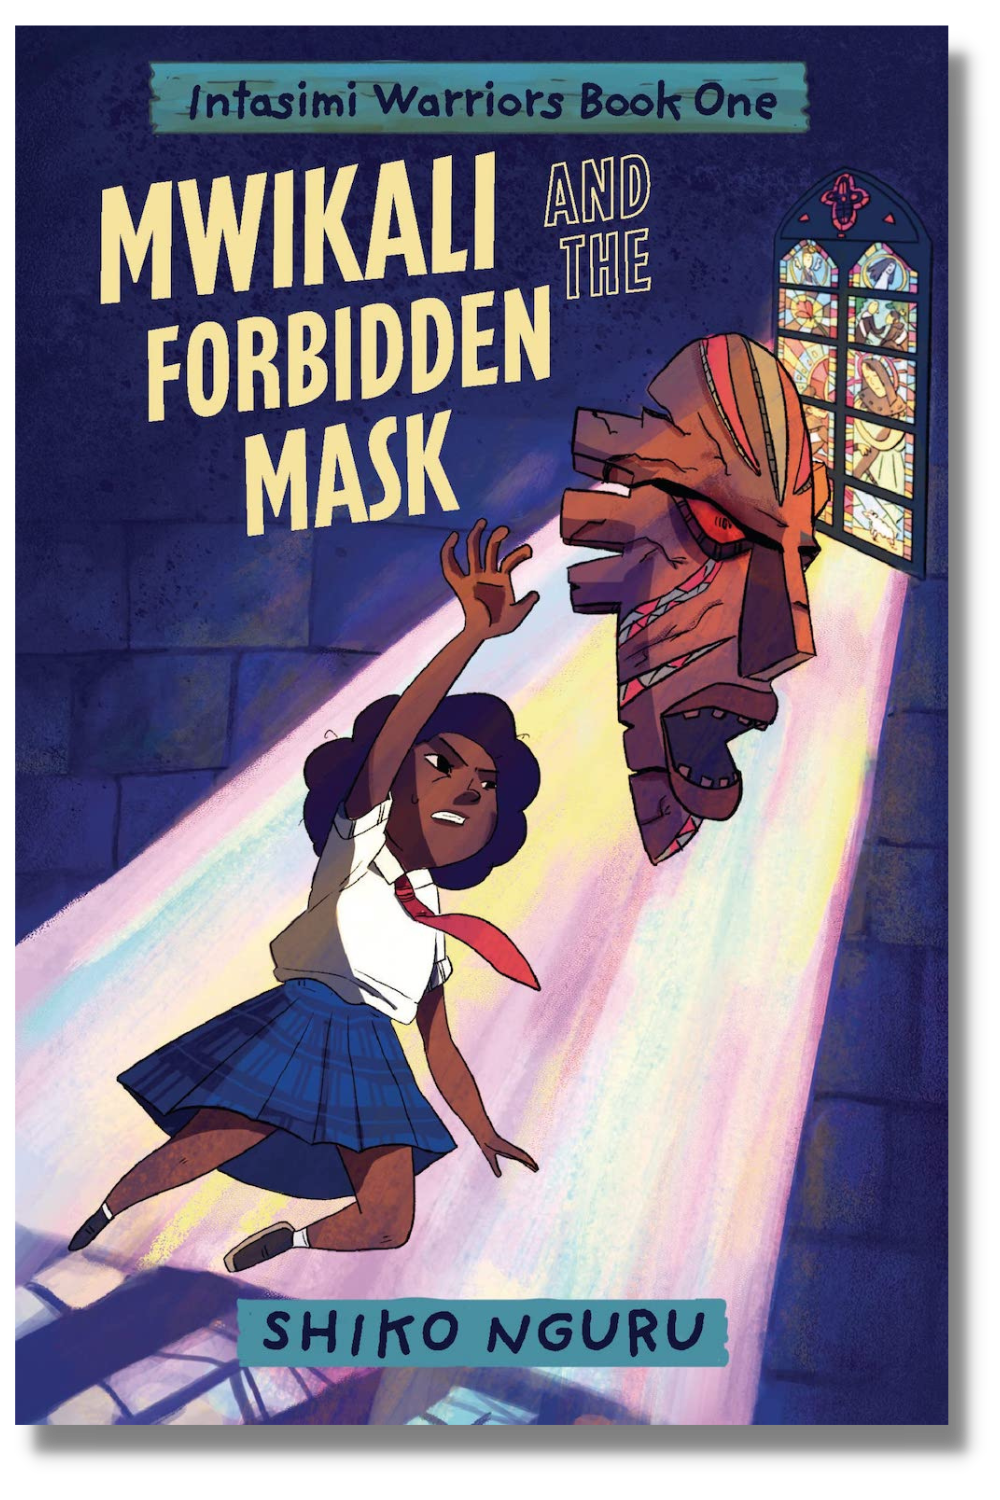 The cover of "Mwikali and the Forbidden Mask"